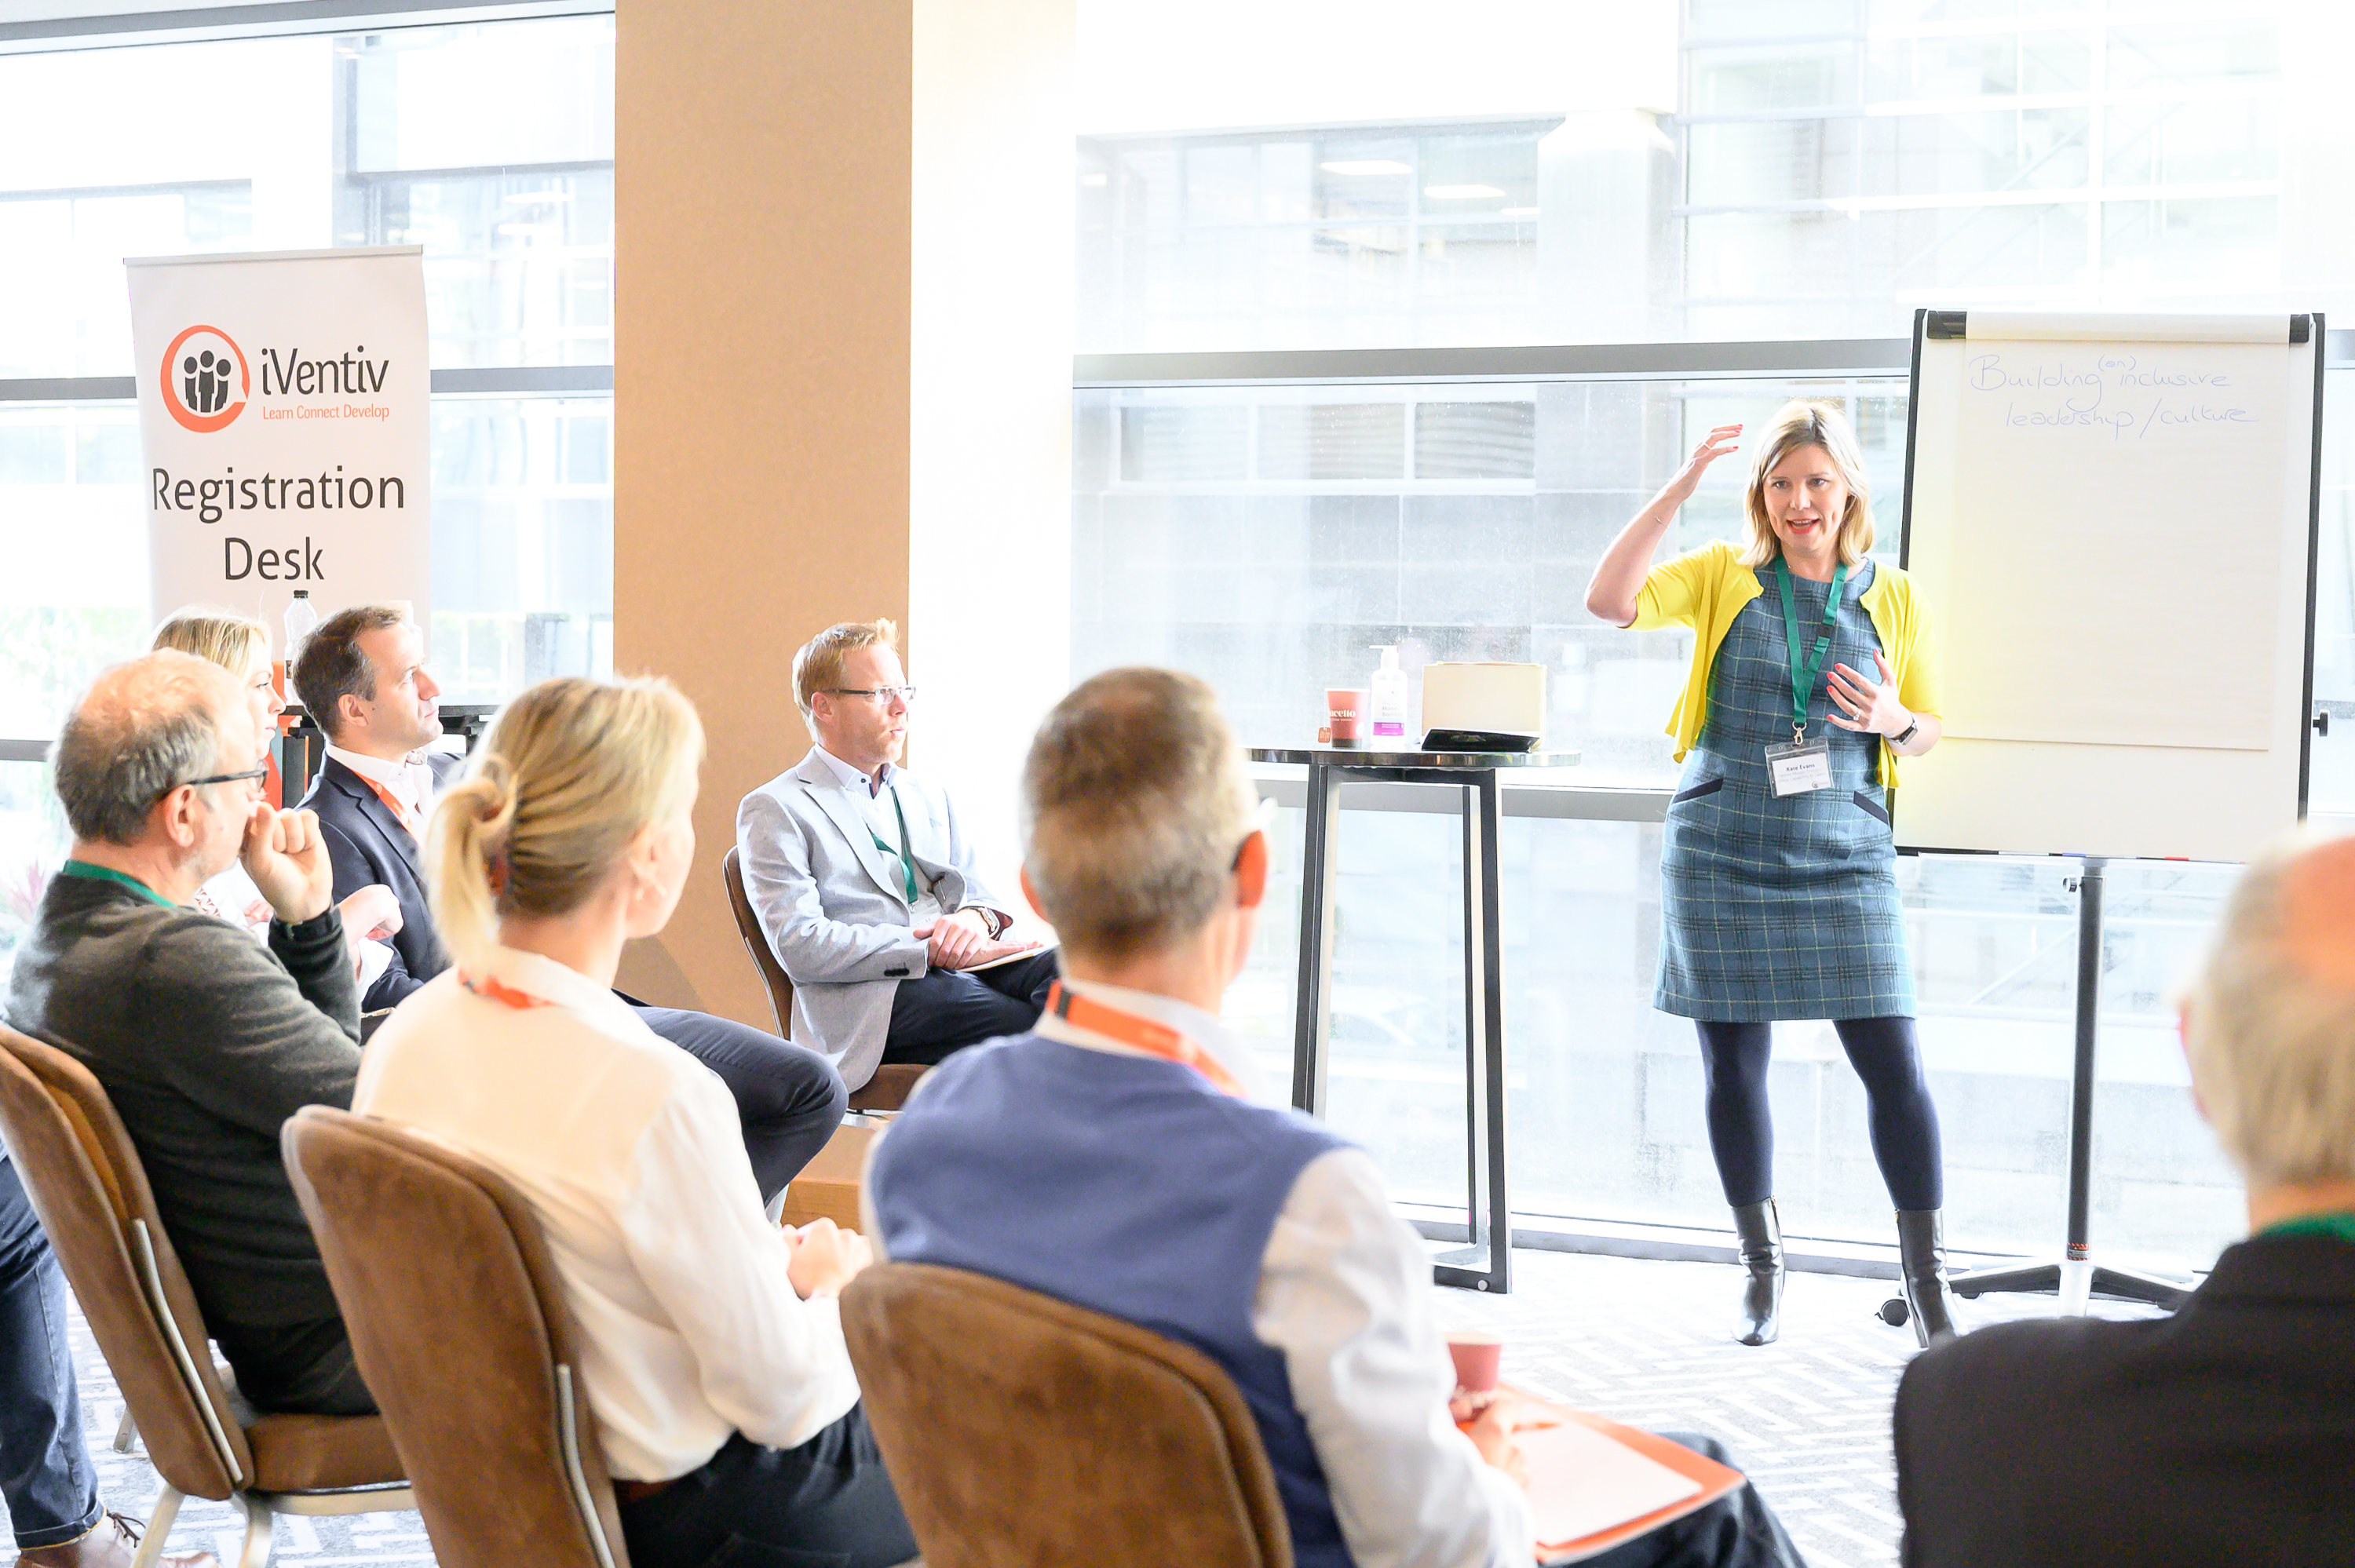 Kate Evans leads a breakout session at an iVentiv event in 2021